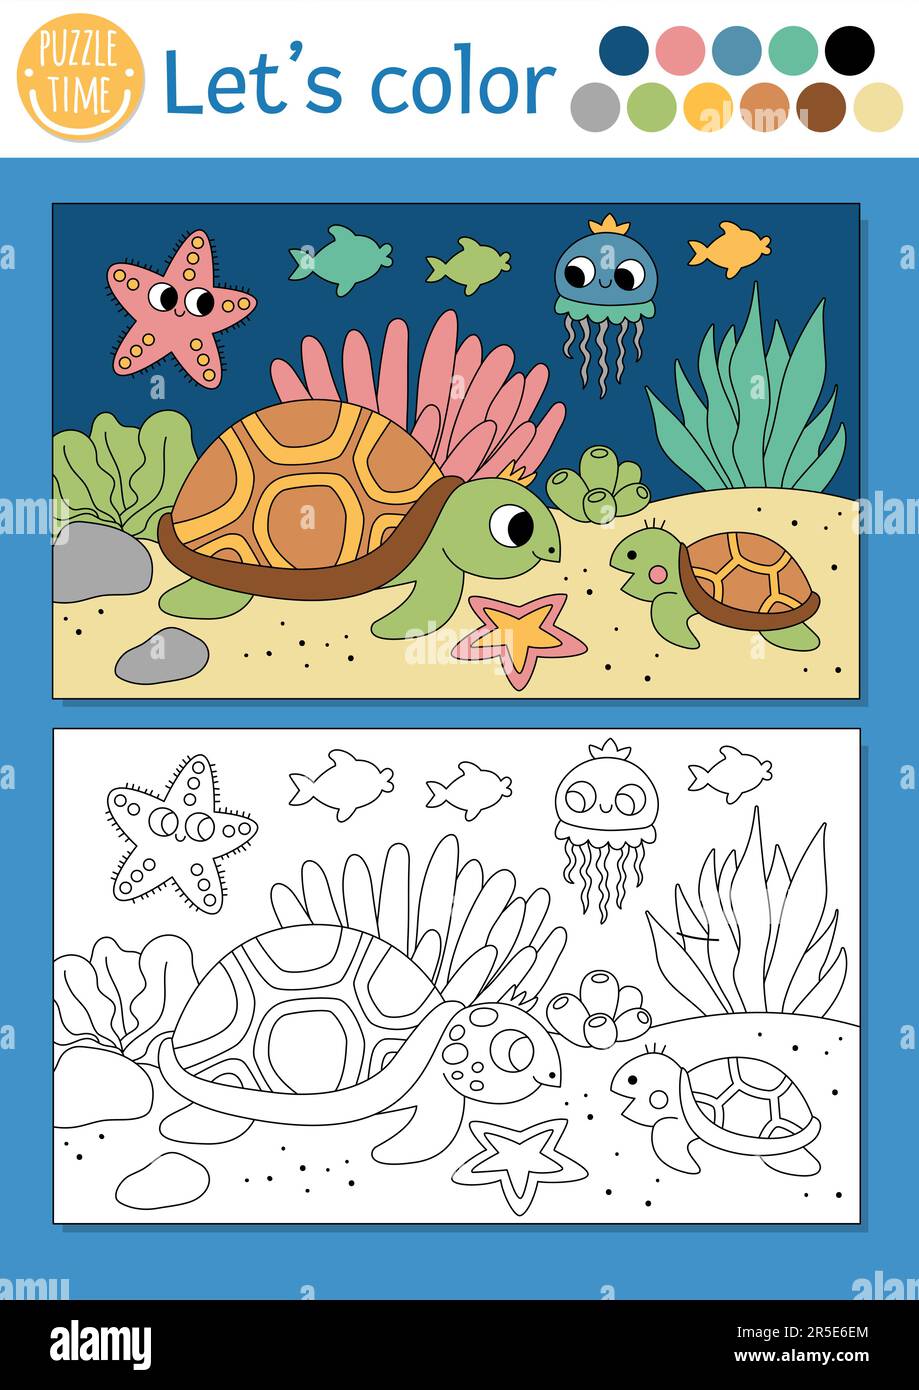 How to Draw a Starfish - 6 step drawing lesson for kids | Sea creatures  drawing, Drawing lessons, Sea animals drawings